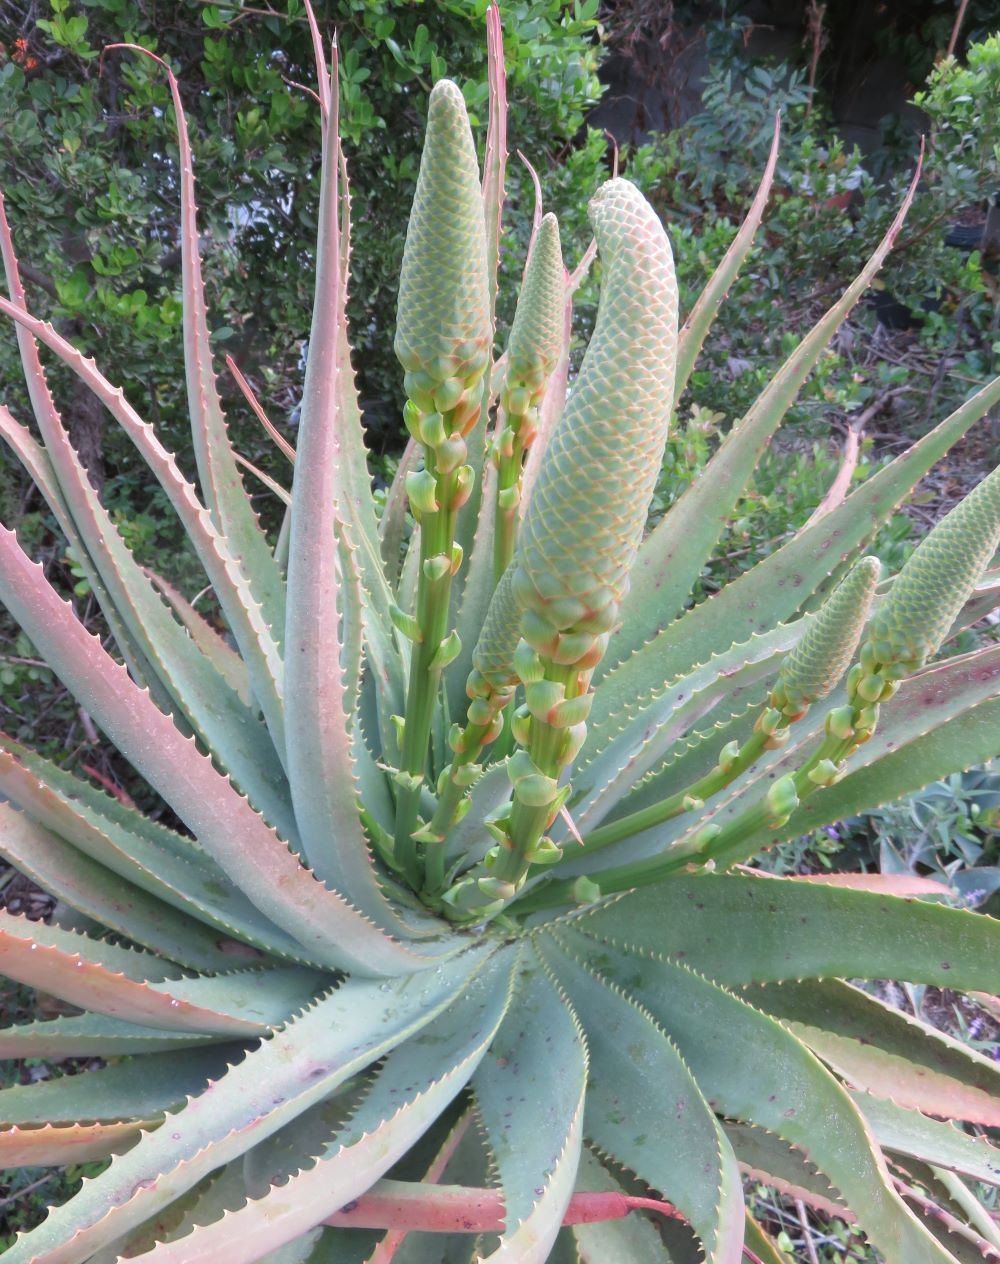 The candelabra aloe flower buds appear in May, the start of our winter.